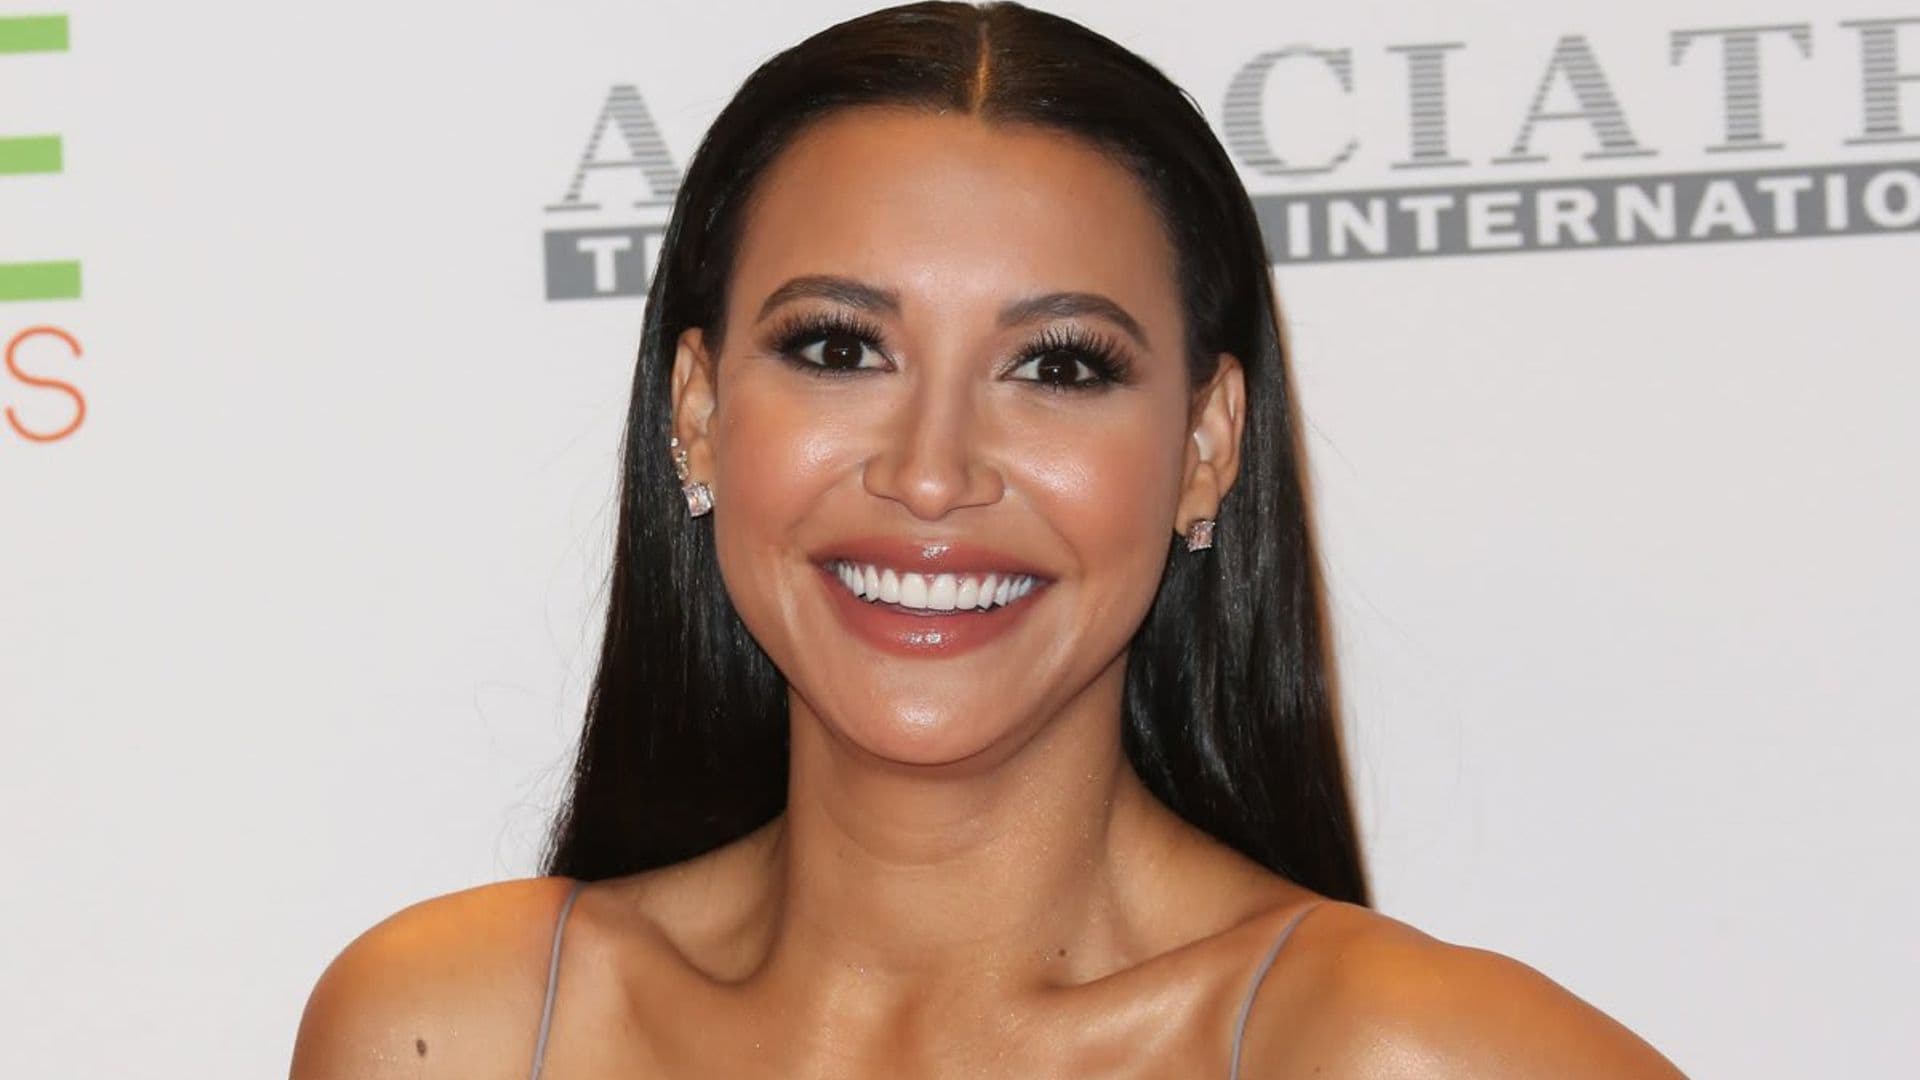 Naya Rivera’s final movie role will be in an animated ‘Batman’ movie